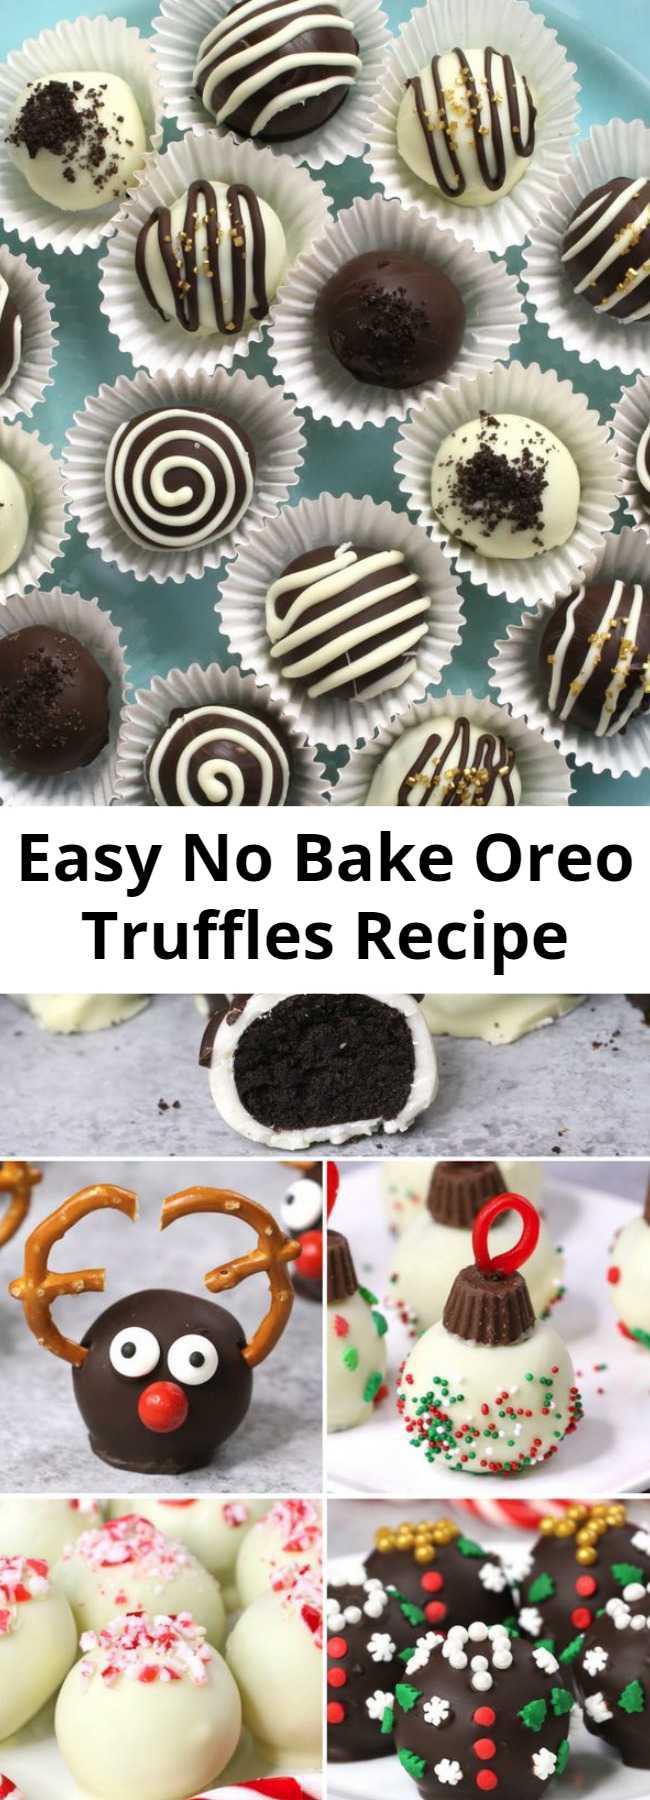 Easy No Bake Oreo Truffles Recipe - These Oreo Truffles are mouthwatering bite-size treat everyone will love! These homemade oreo balls are coated in chocolate and decorated with sprinkles and drizzle for a stunning presentation. Perfect for a party and also as fun DIY gifts.